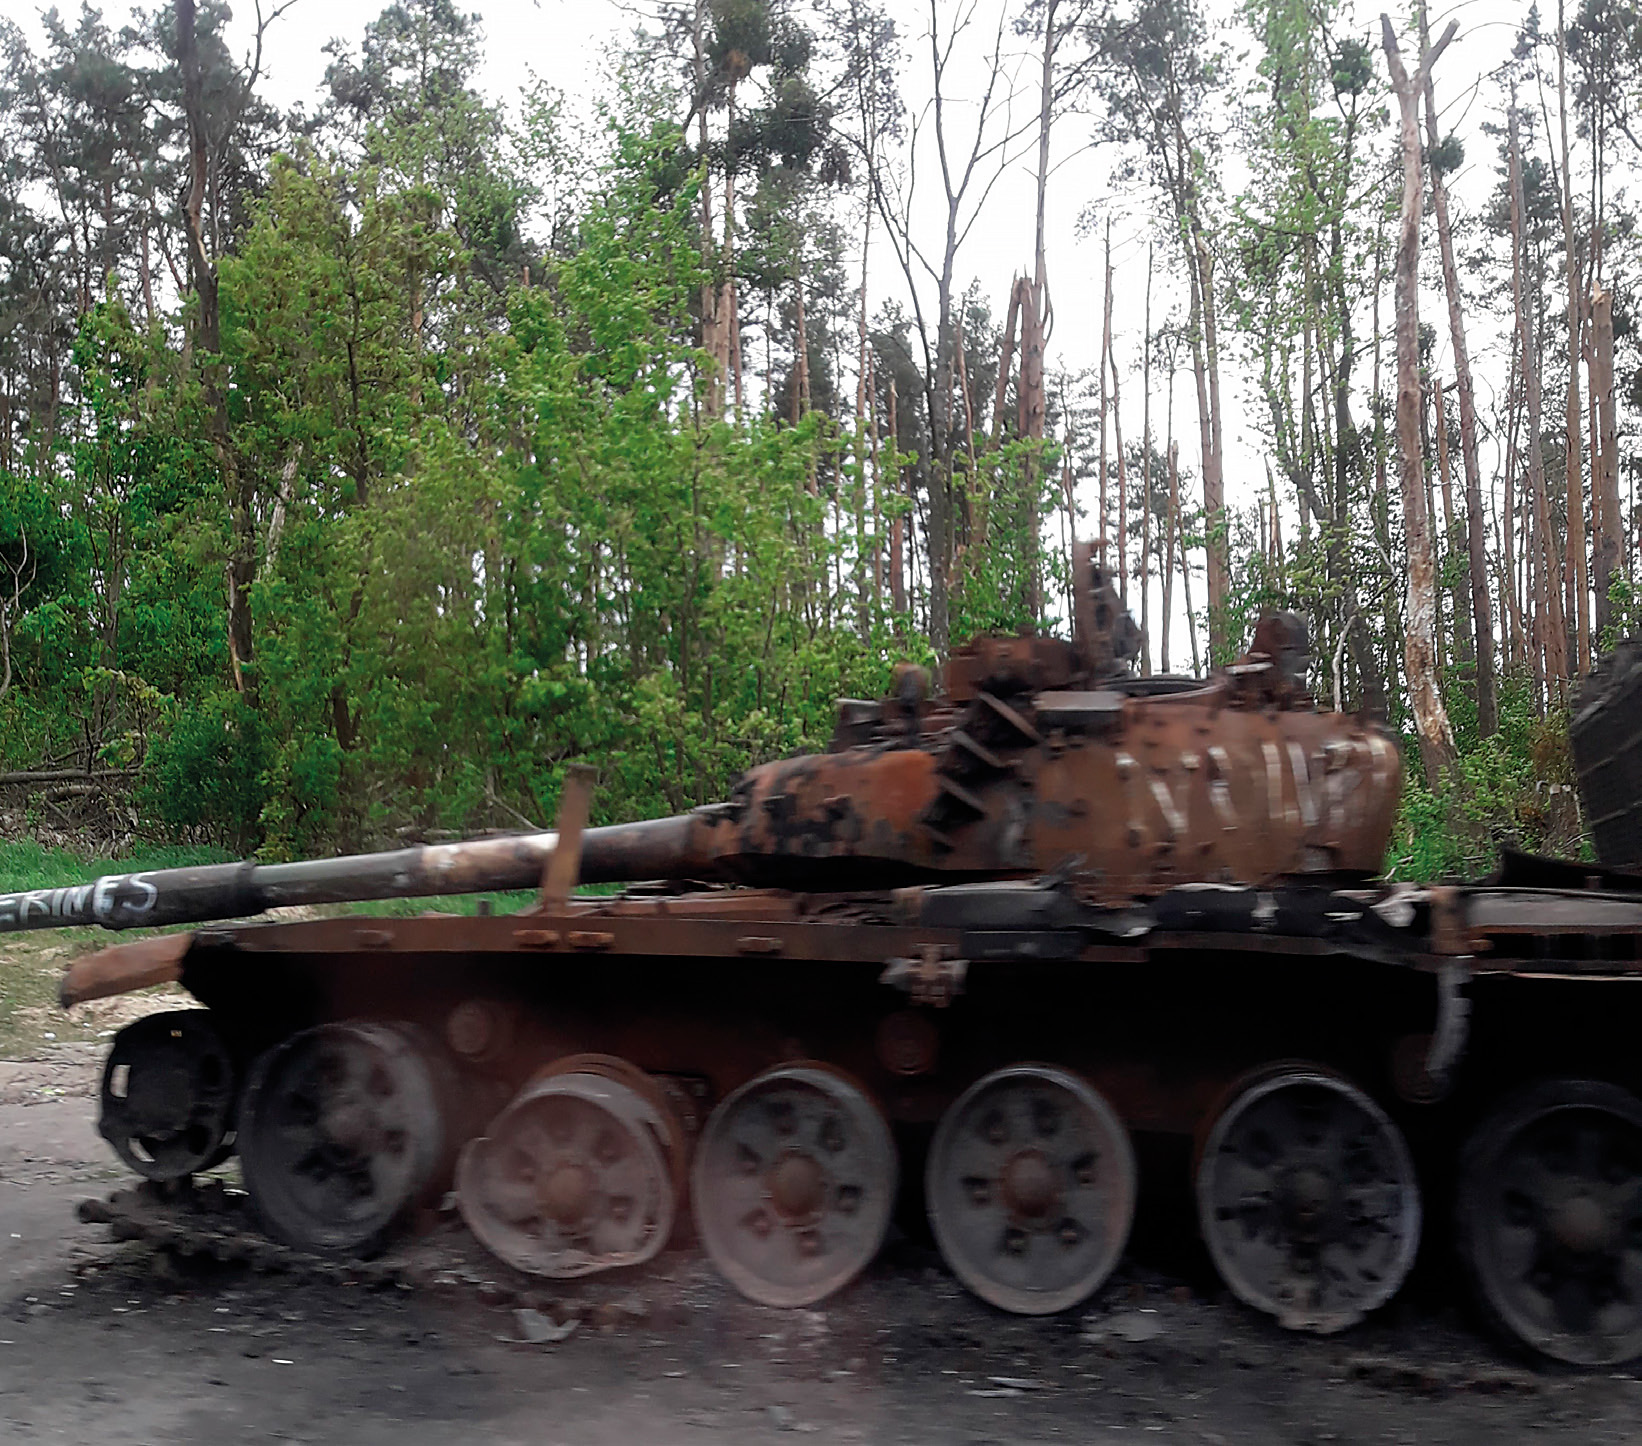 Figure 1: Burnt-out Russian tank and evidence of leaked fluids (gasoline, but also toxic remnants of ammunition, brake fluid and hydraulic fluids) that can contaminate a landscaped area.